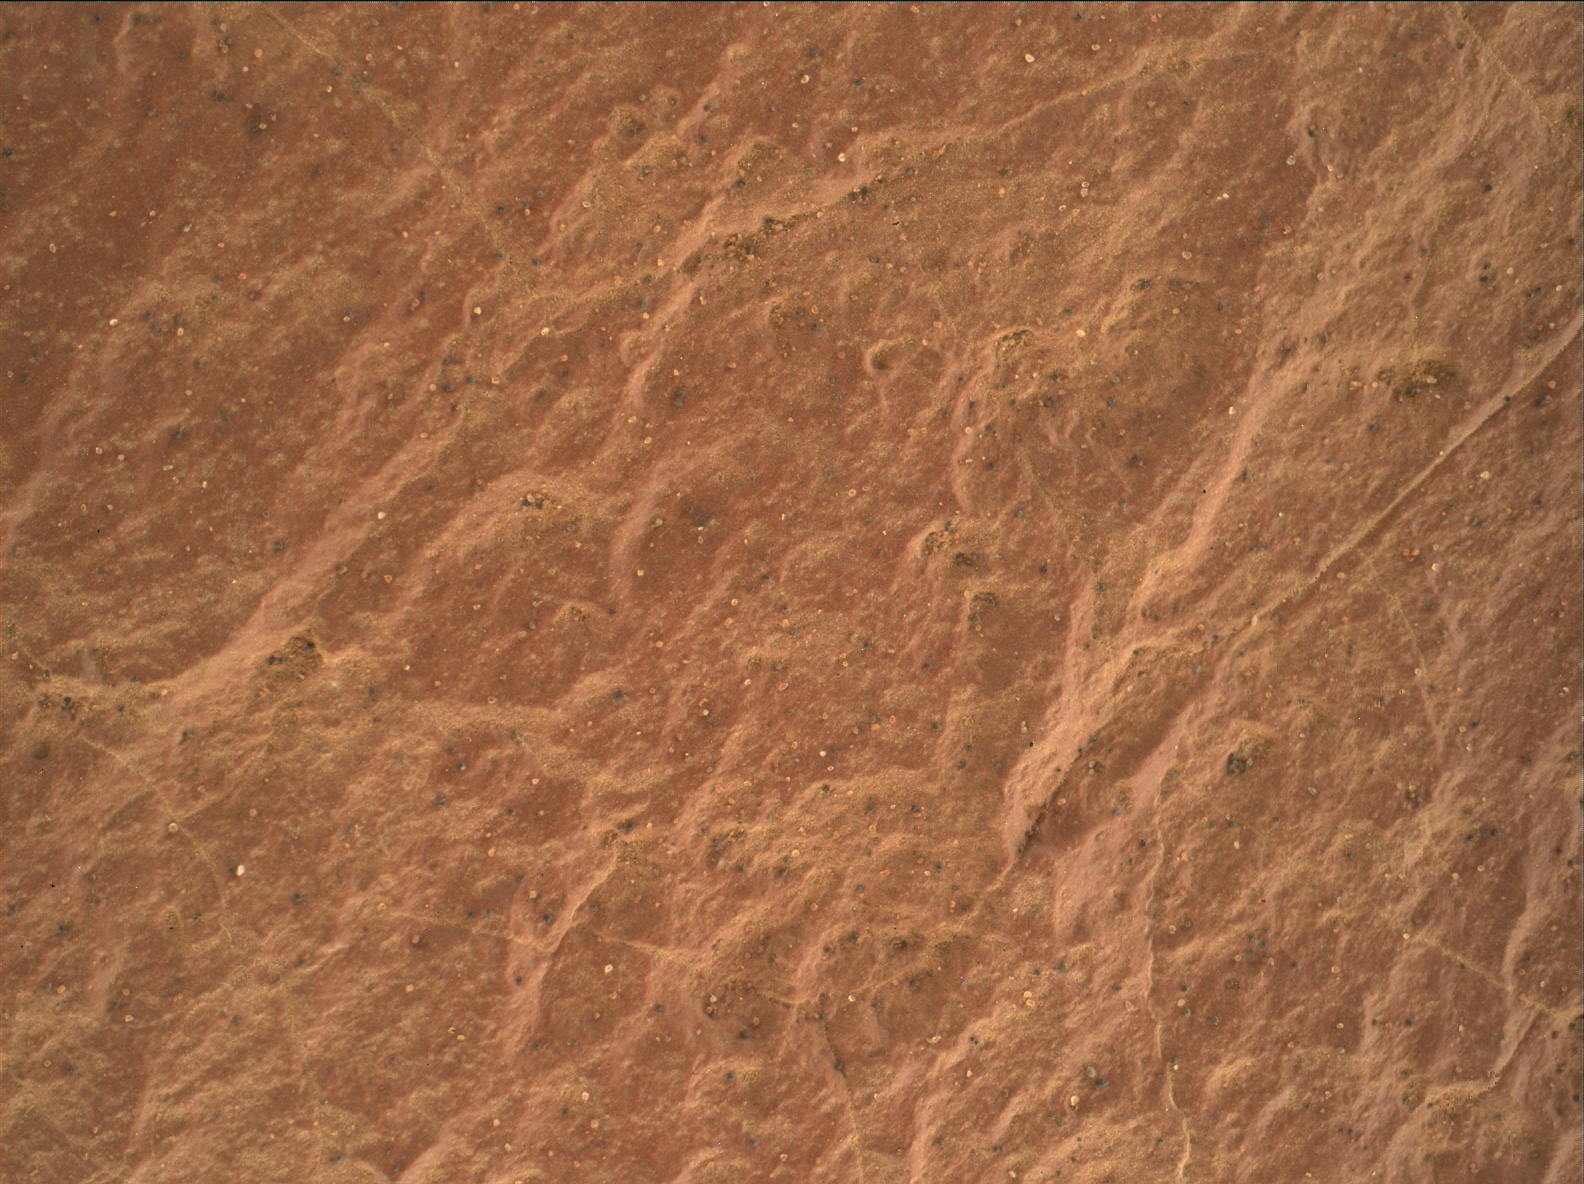 Nasa's Mars rover Curiosity acquired this image using its Mars Hand Lens Imager (MAHLI) on Sol 1584